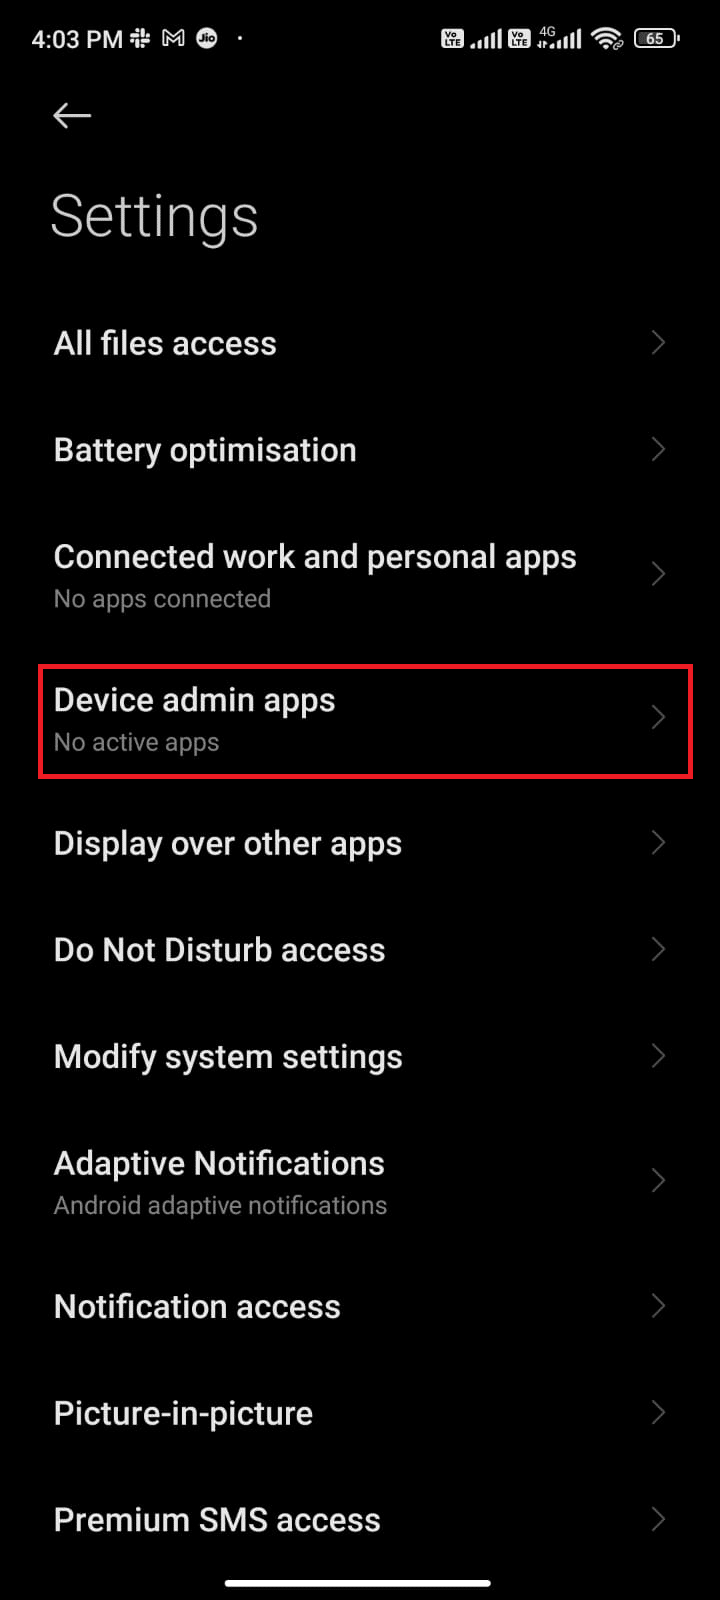 tap the Device admin apps setting from the list. How to Tell If Your Phone is Tapped